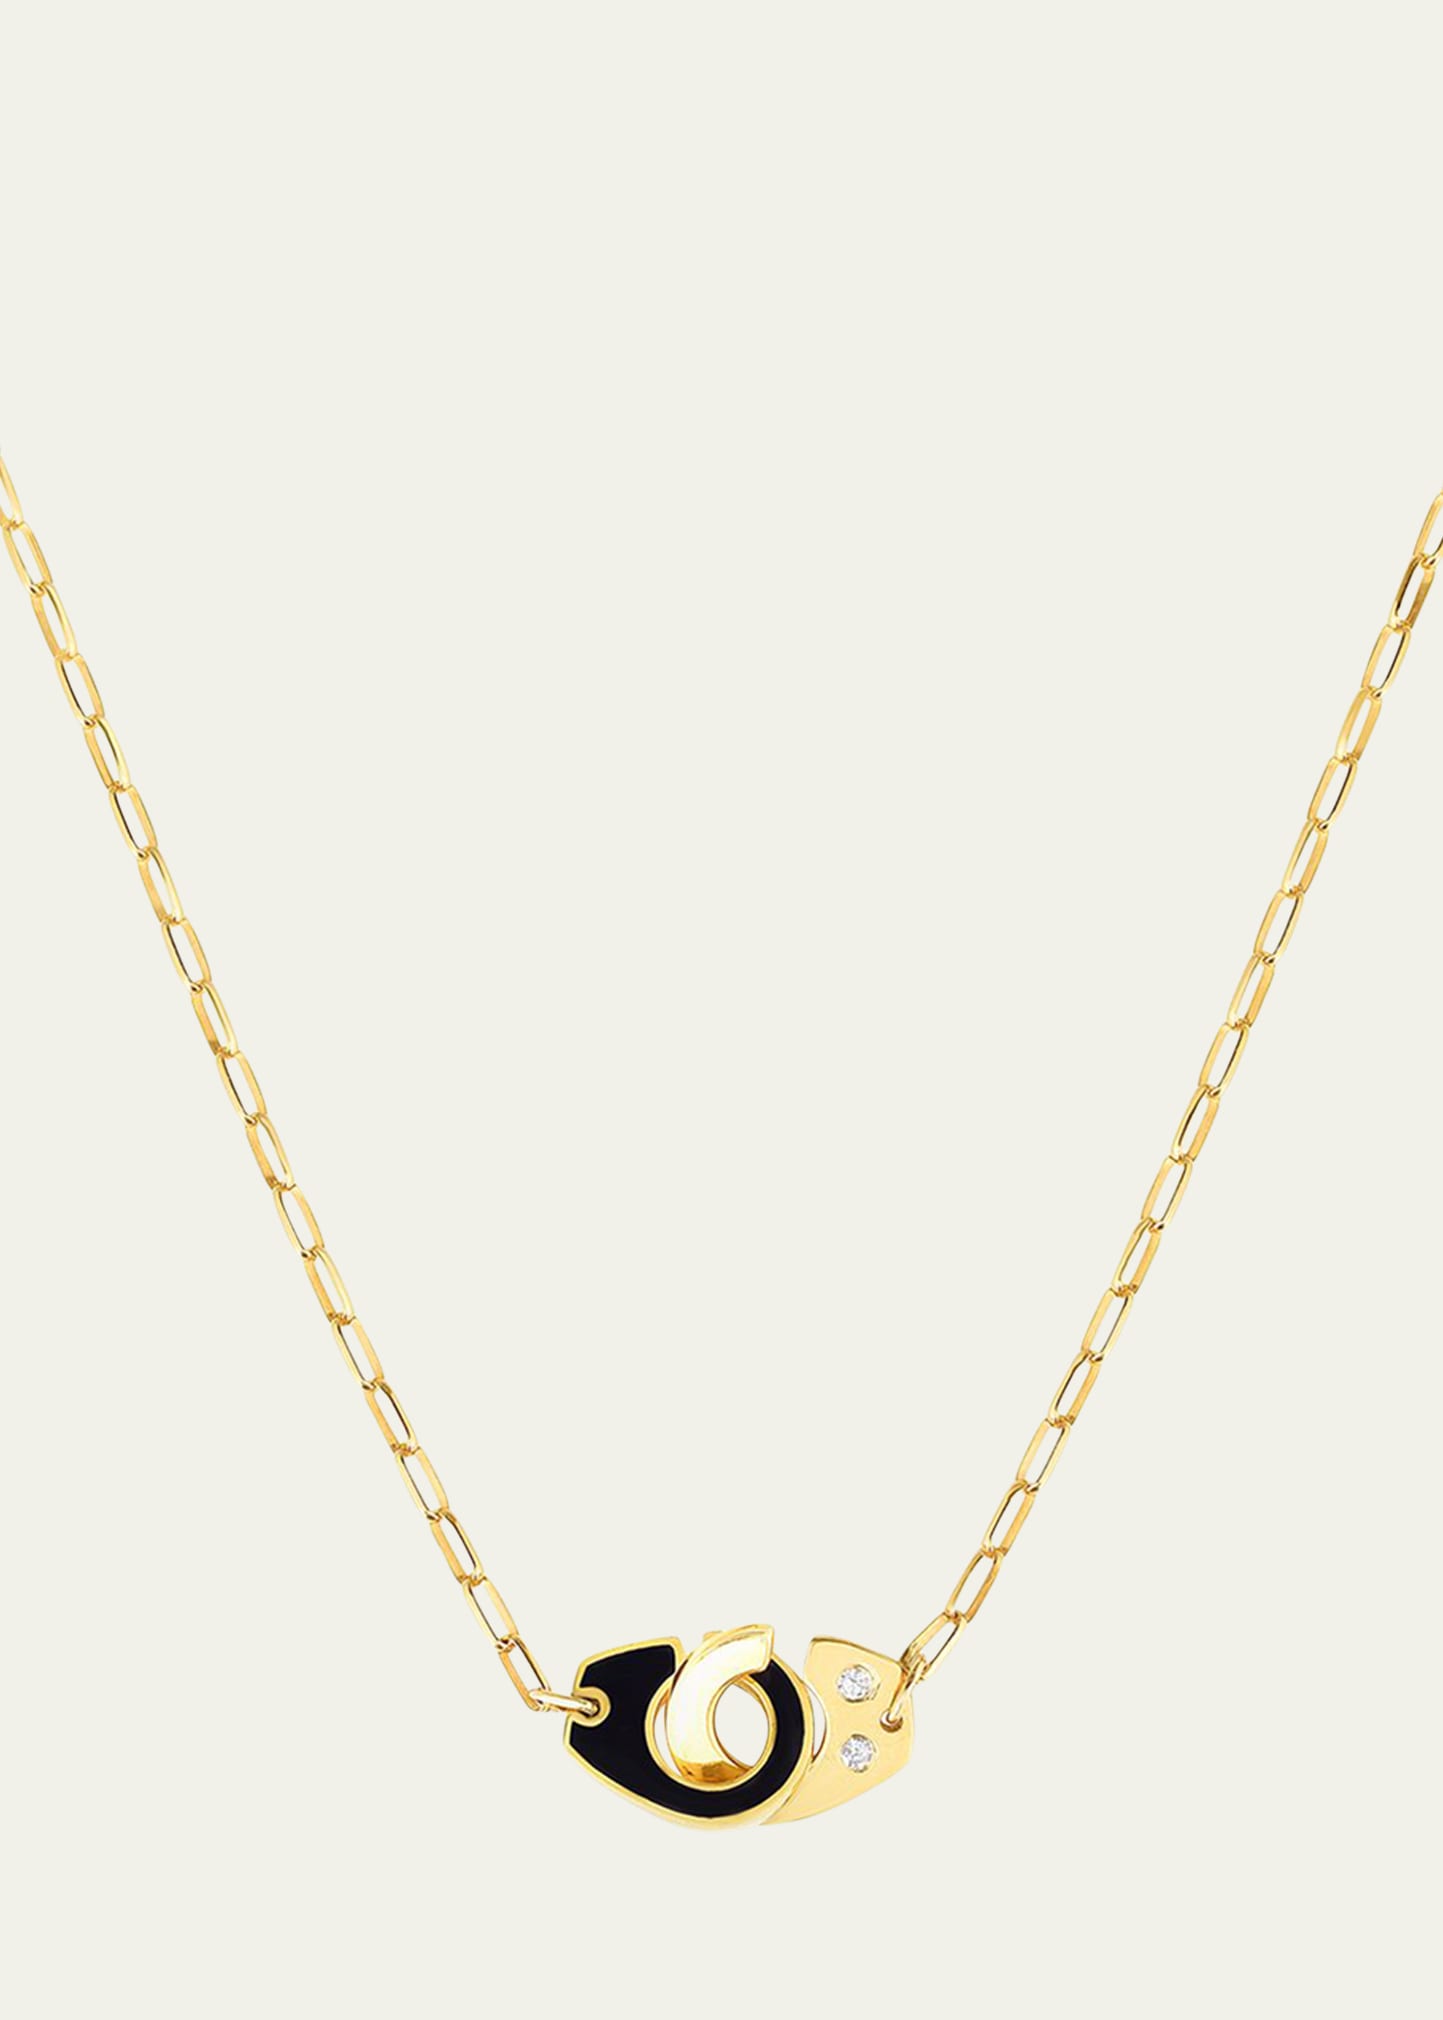 Audrey C. Jewels Partners in Crime Classic Necklace